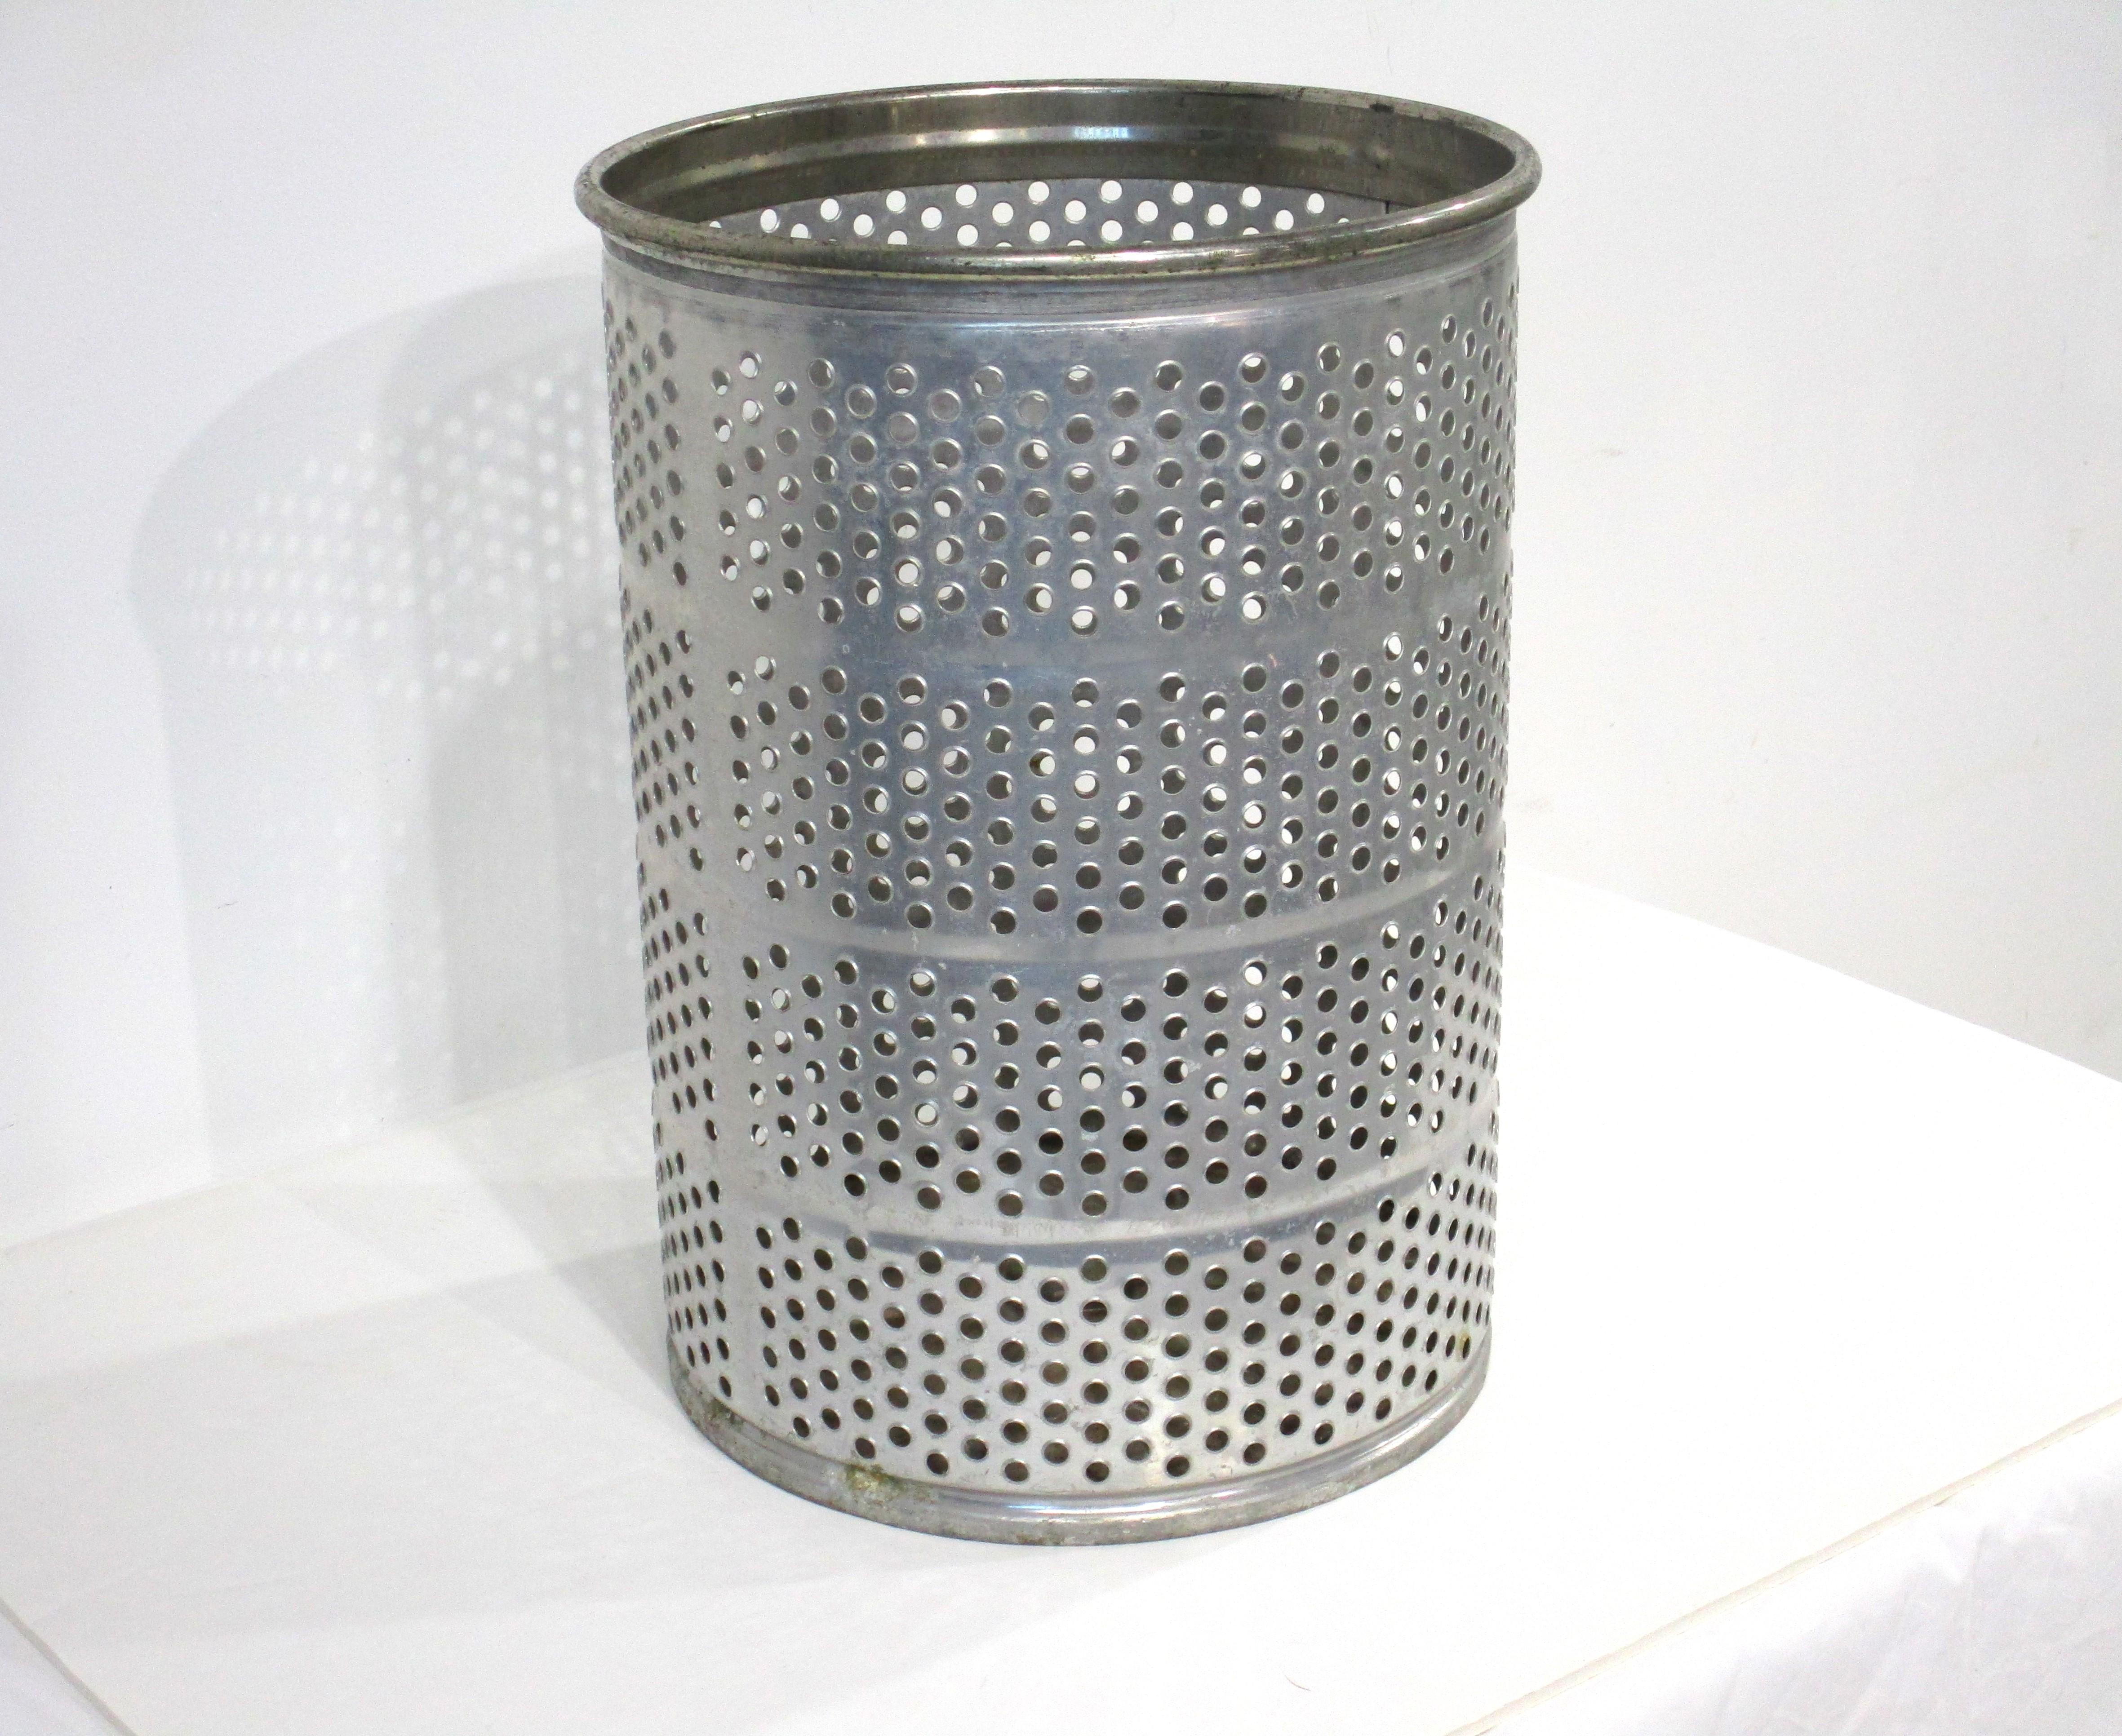 A very well crafted perforated Machine Age / Art Deco metal wastebasket with smooth beaded top edge and bottom . Marking to the side edge 10-36 date made or model number the manufacture unknown . Perfect for your desk , office or a bathroom designed